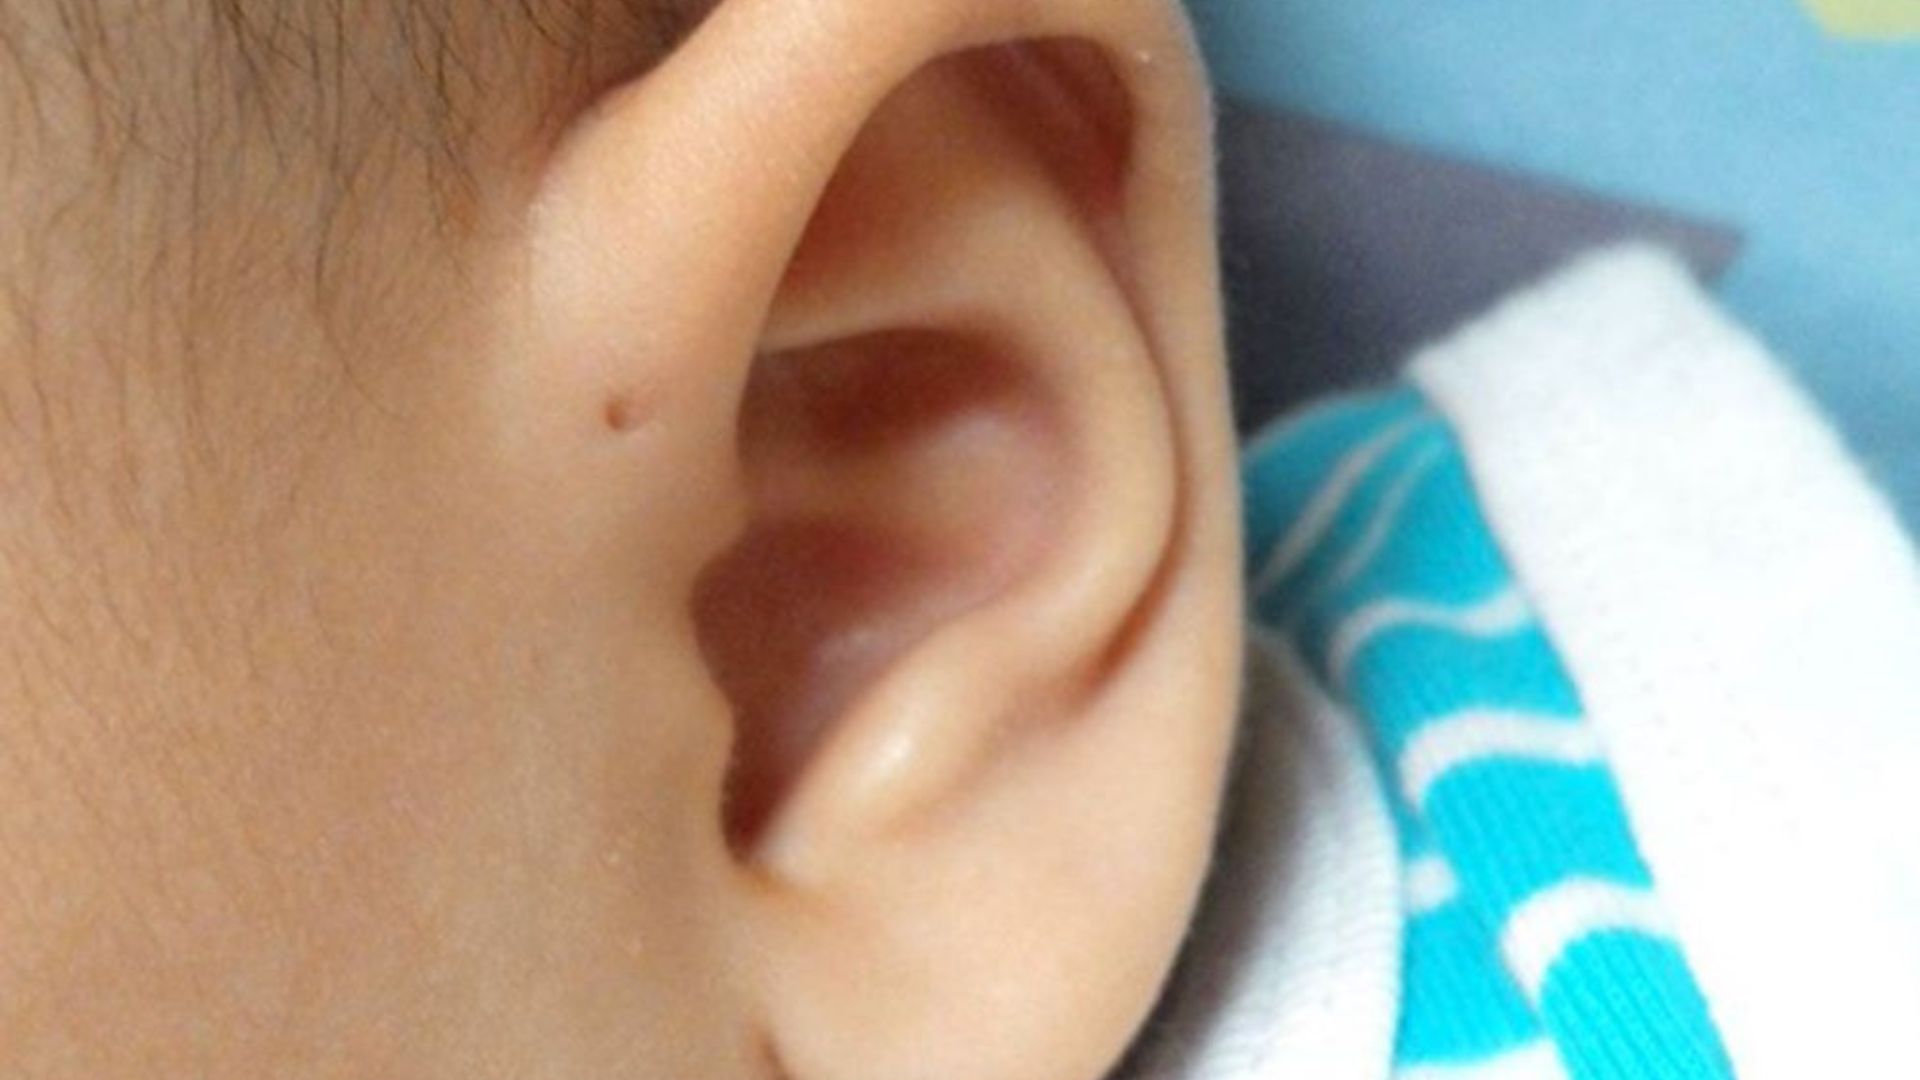 Hole In The Child's Ear